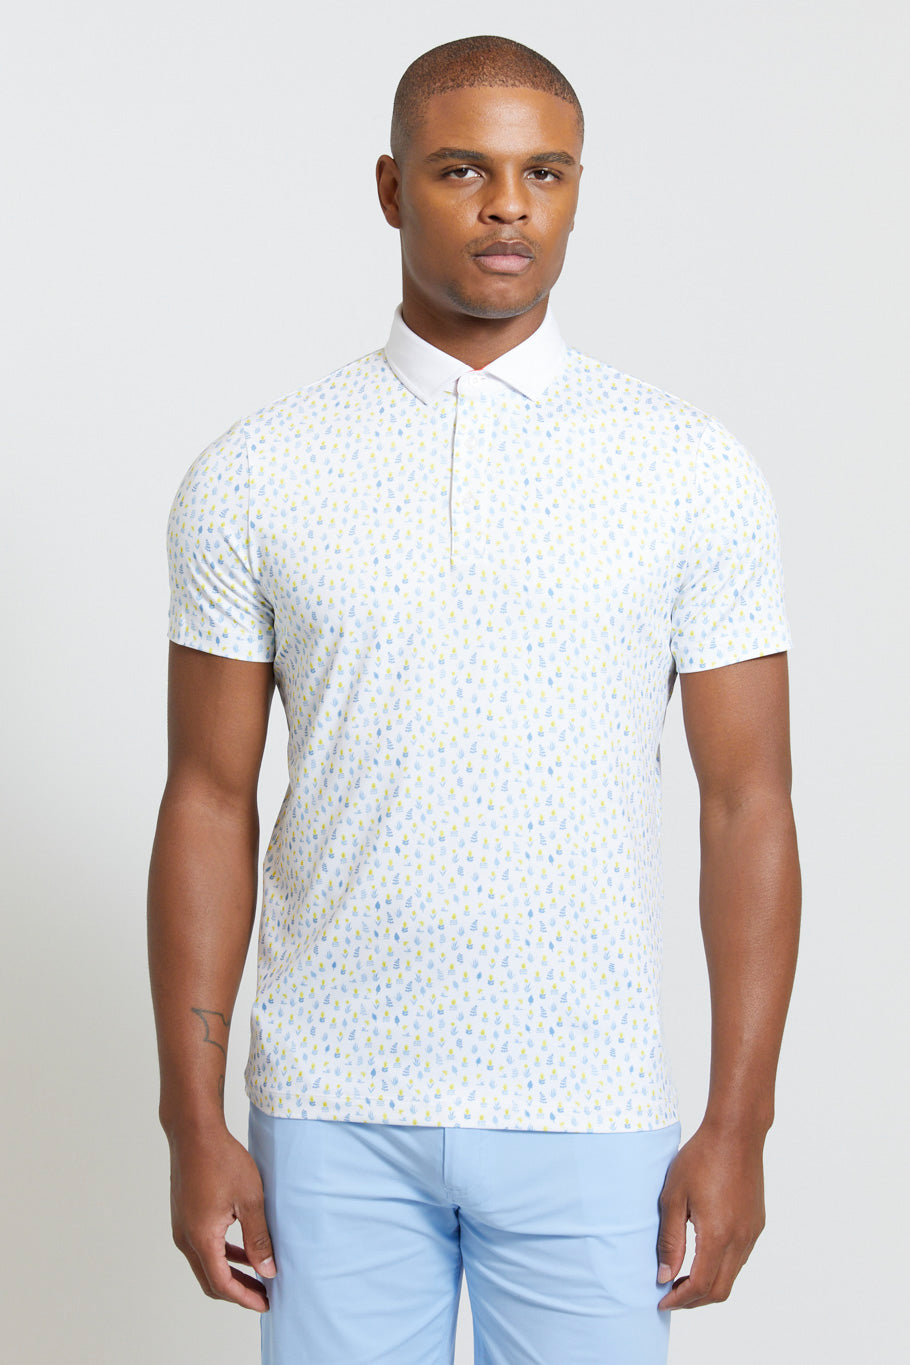 Image of the ashland polo in bright white ss23